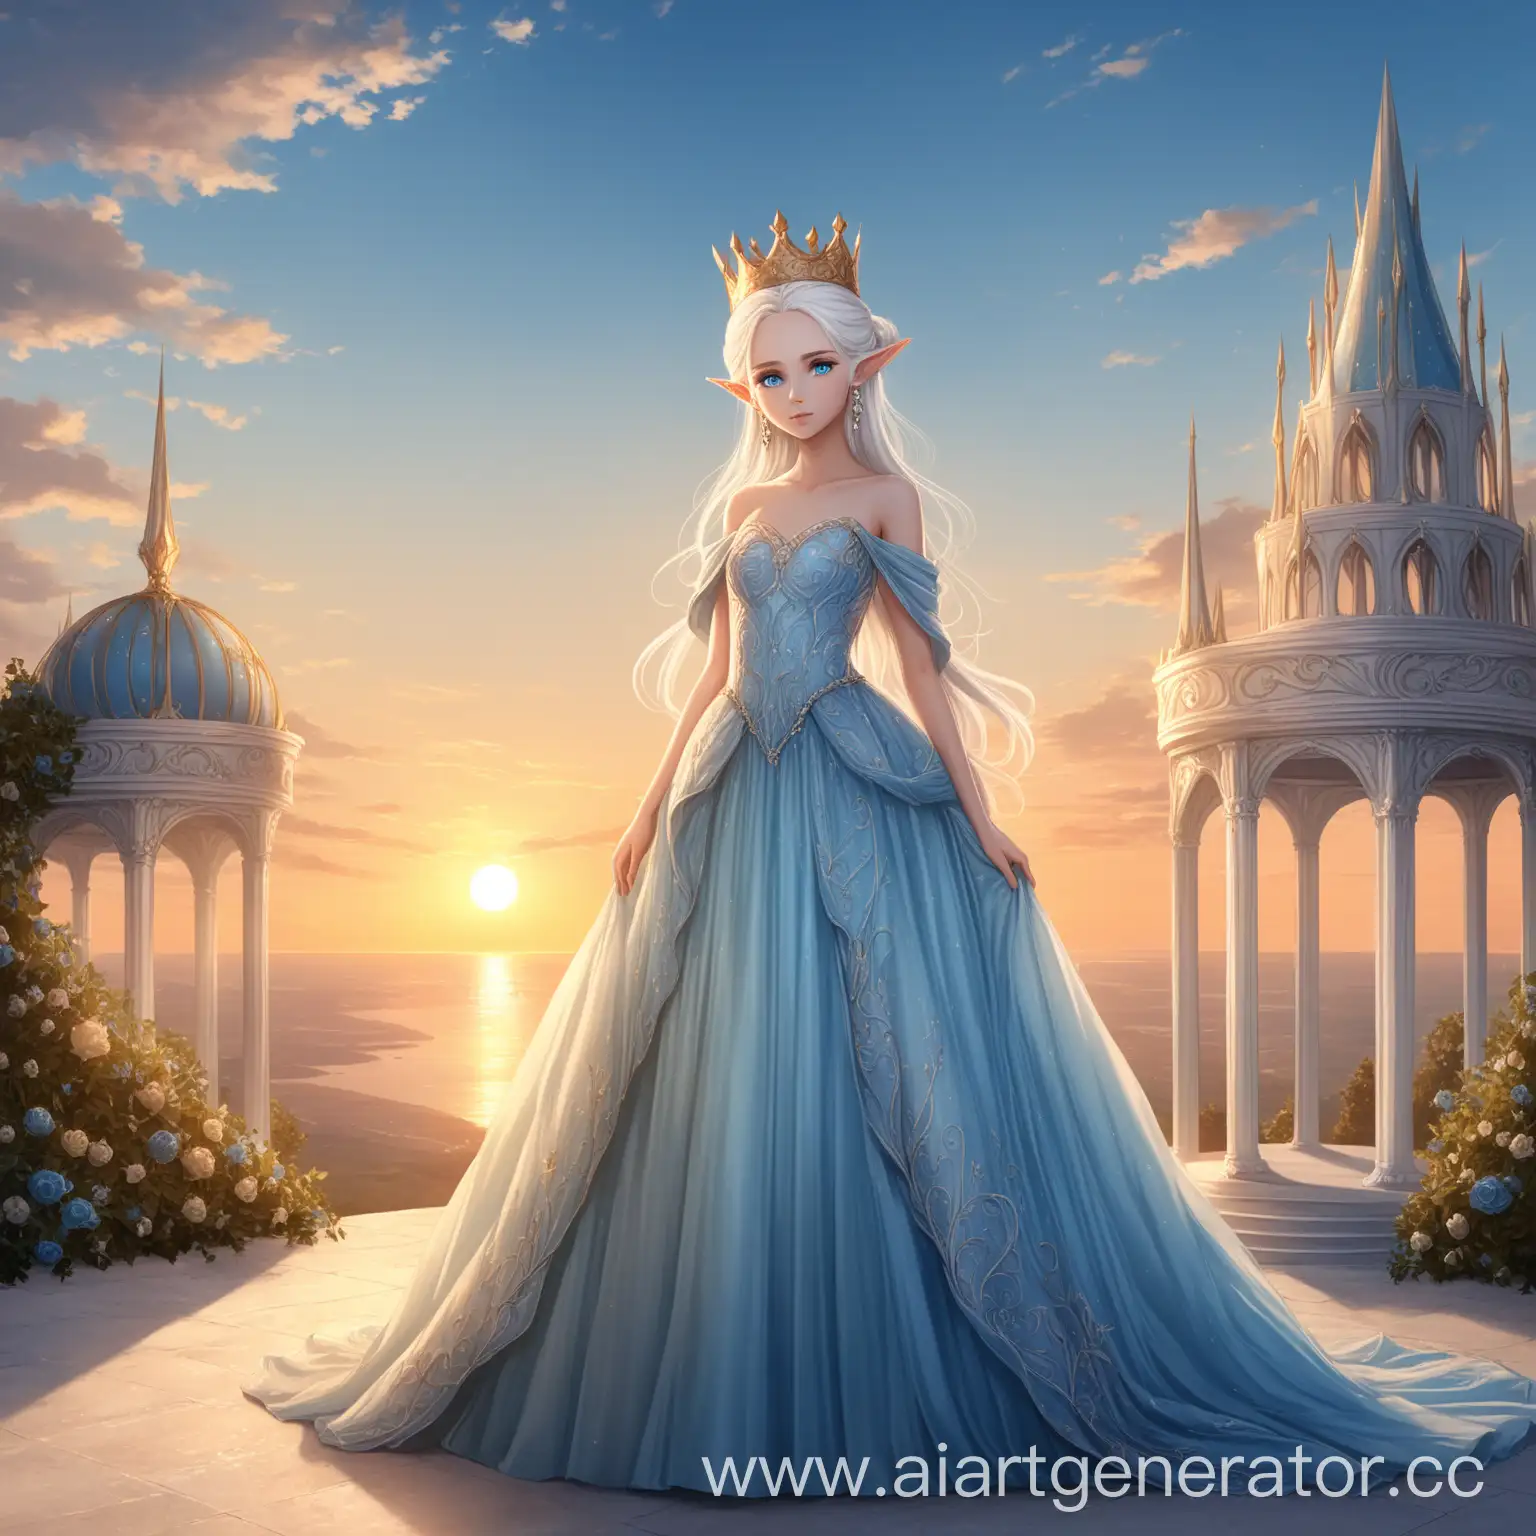 Elegant-Elf-Queen-in-Skyblue-Ball-Gown-at-Sunset